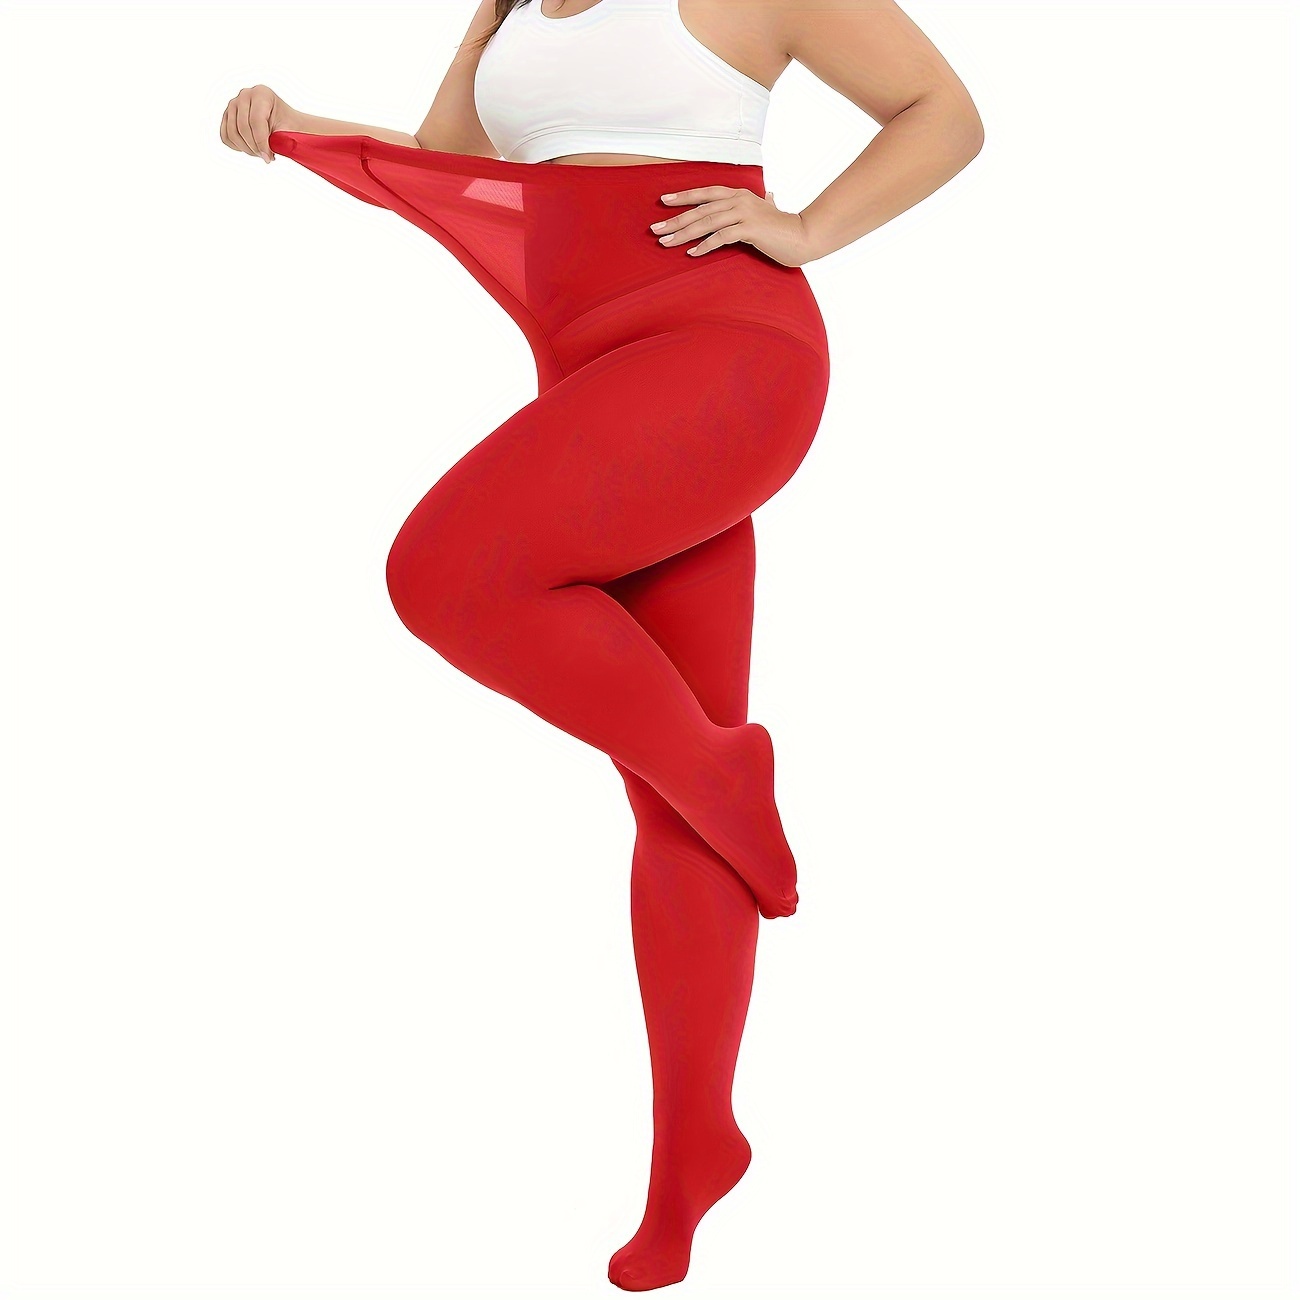 Hosiery Women's Plus Size Control Top Panty Hose Opaque Tights